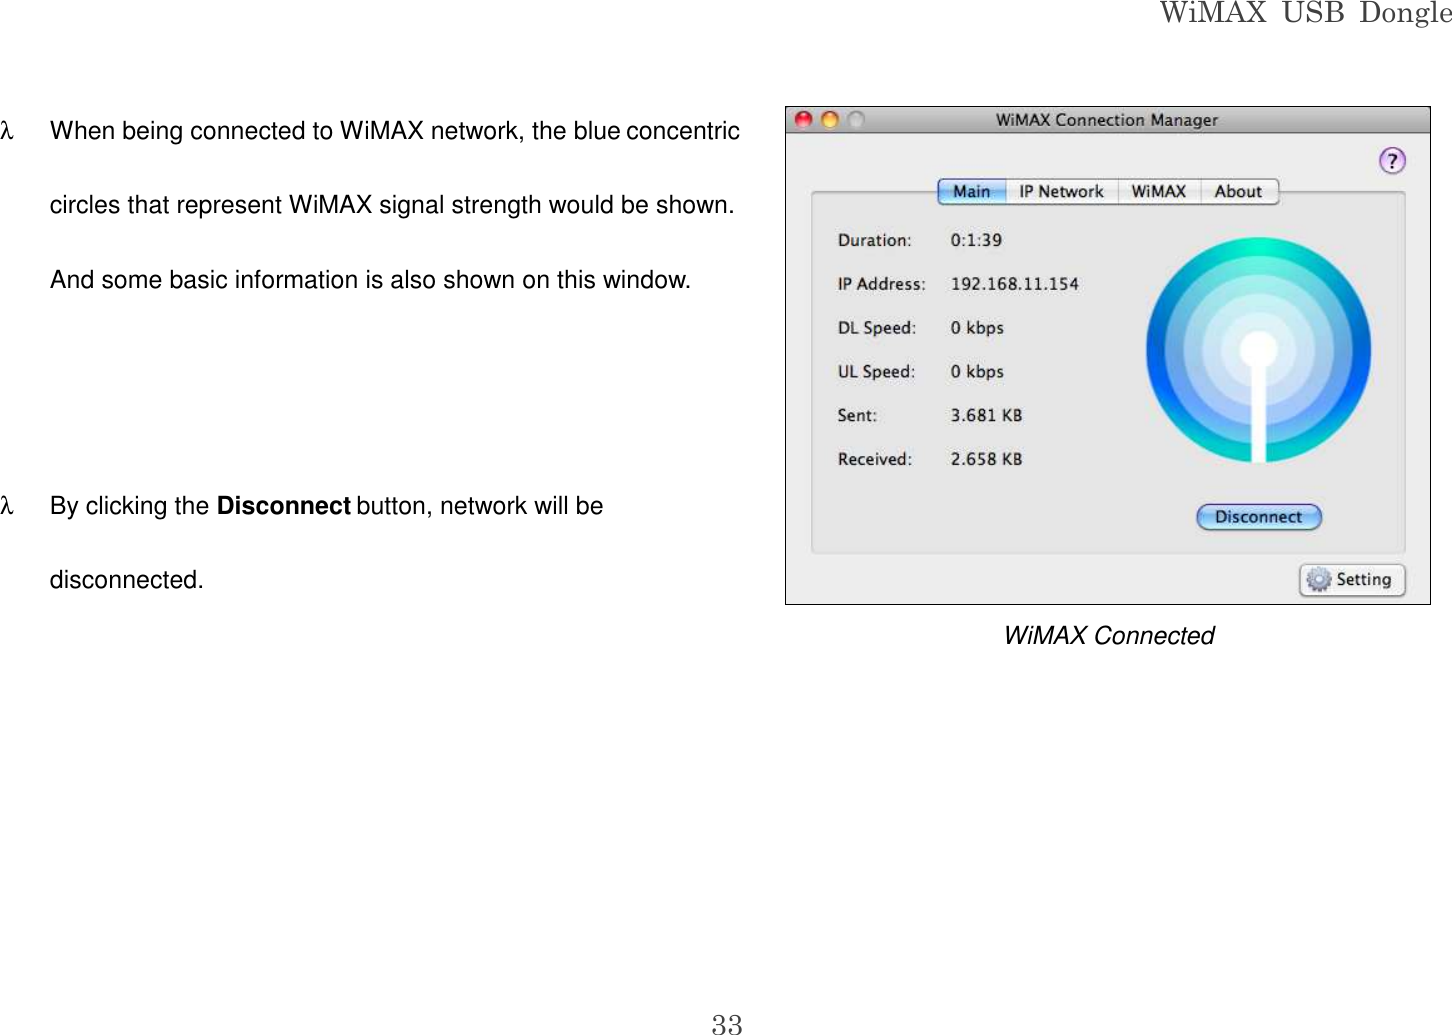 WiMAX  USB  Dongle  33 λ  When being connected to WiMAX network, the blue concentric circles that represent WiMAX signal strength would be shown. And some basic information is also shown on this window.   λ  By clicking the Disconnect button, network will be disconnected.      WiMAX Connected  